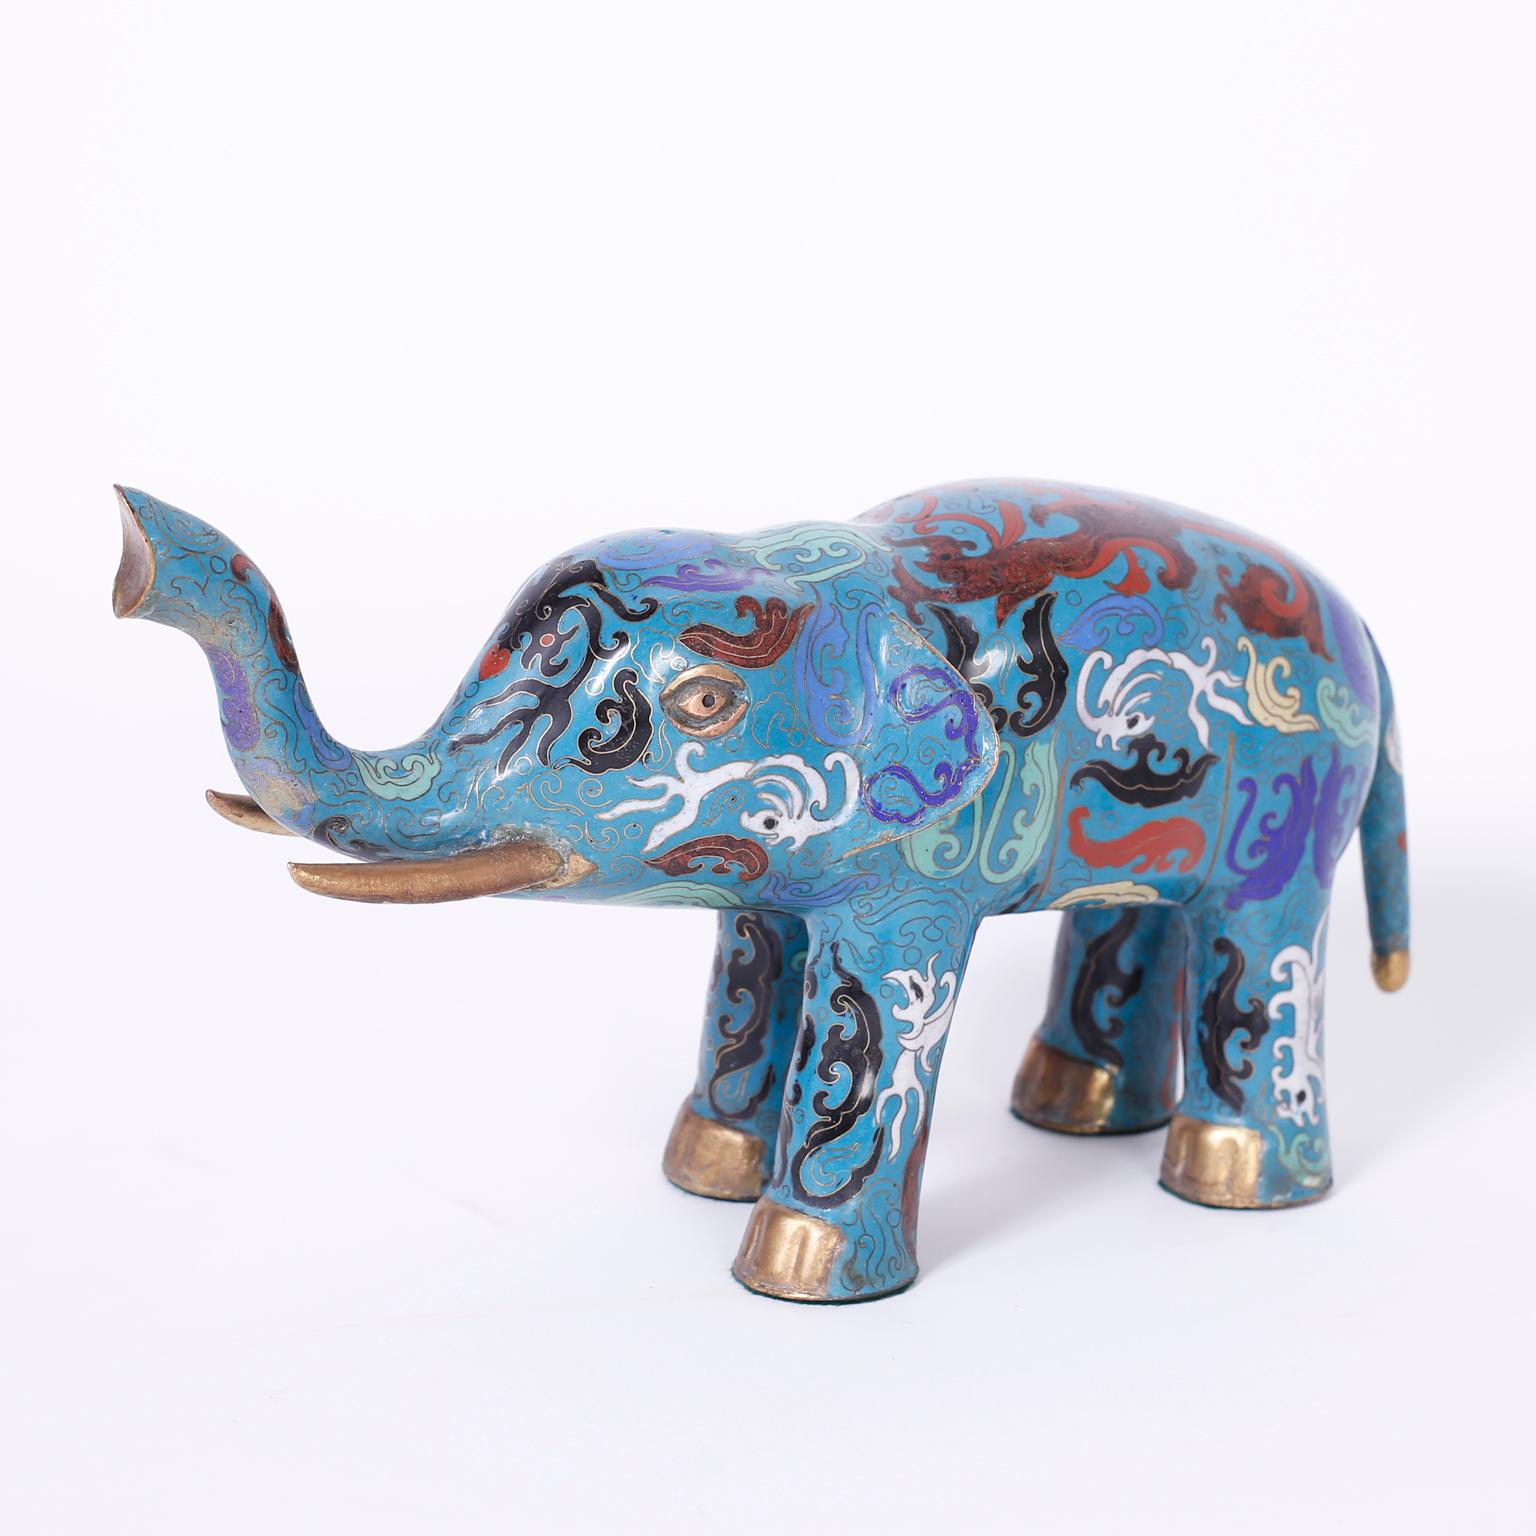 Enchanting pair of Chinese cloisonné or enamel on copper elephants decorated with symbolic biomorphic designs on an alluring blue background.
 